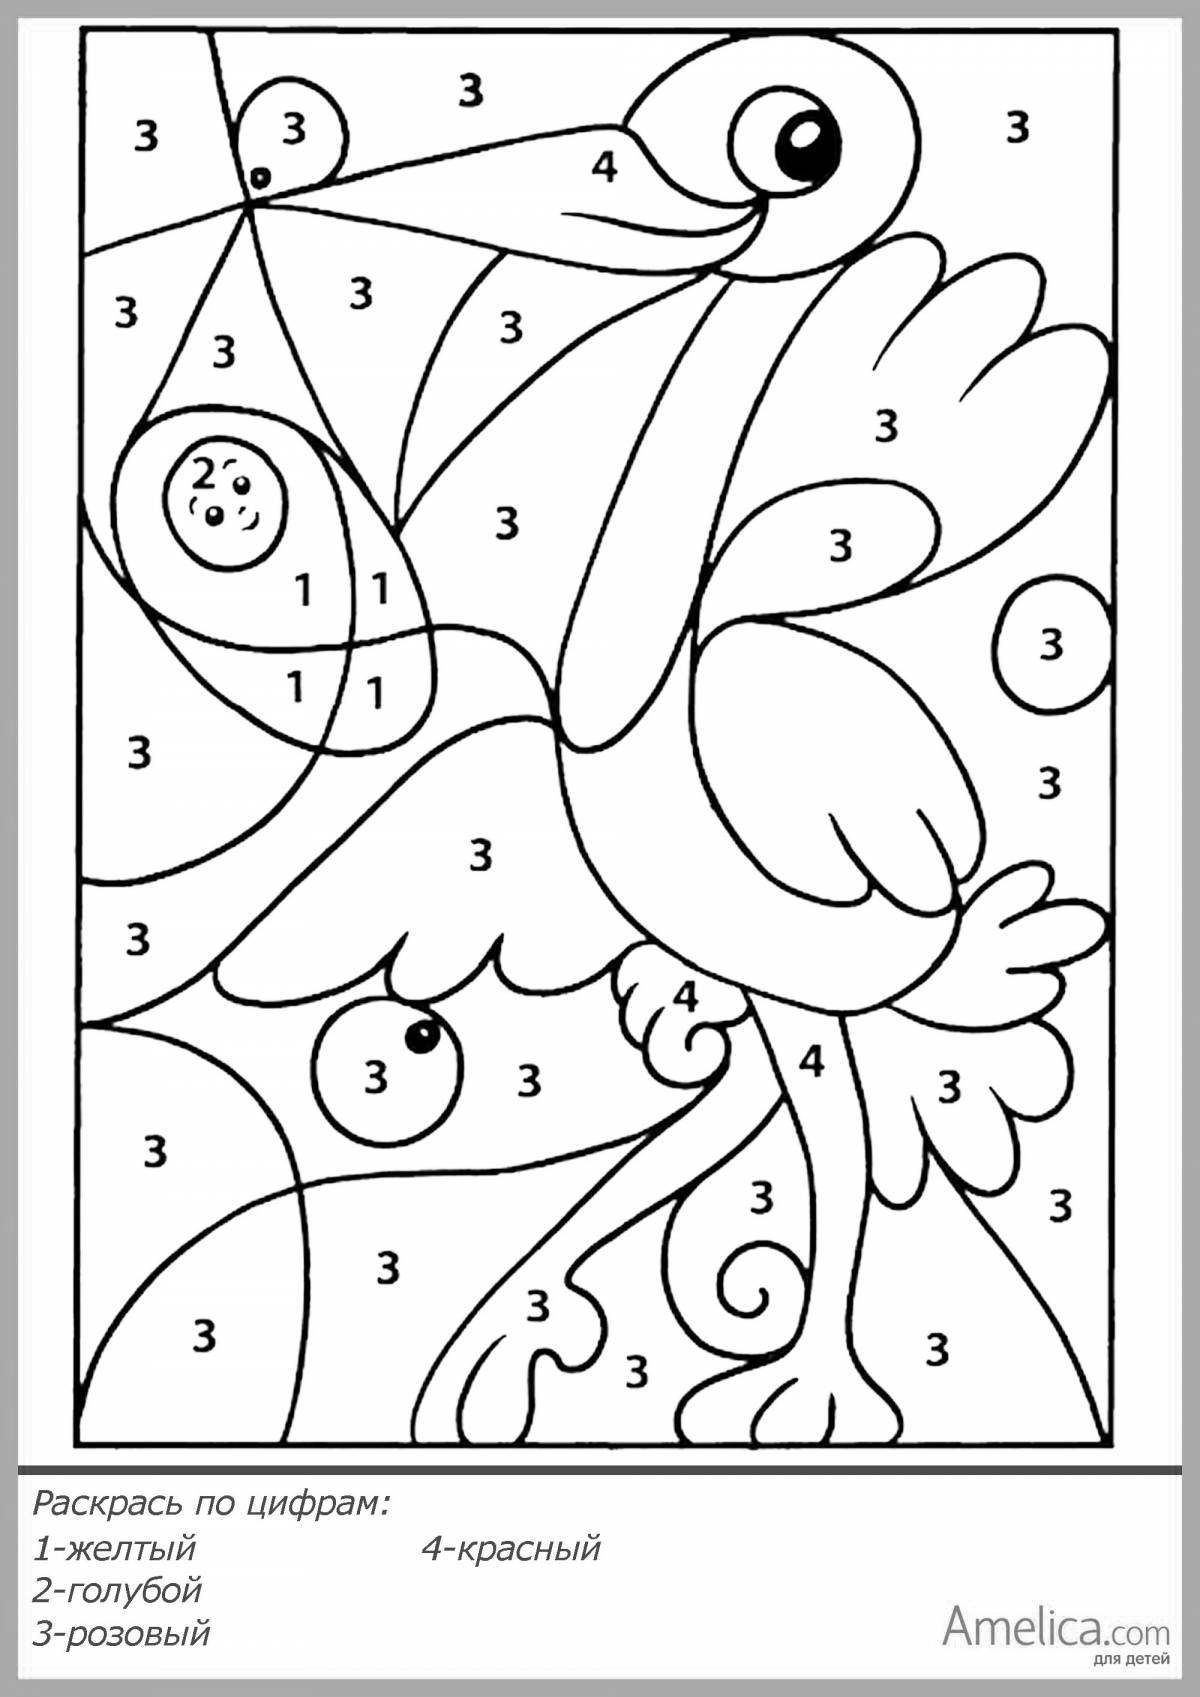 Colorfully detailed 1st grade coloring page